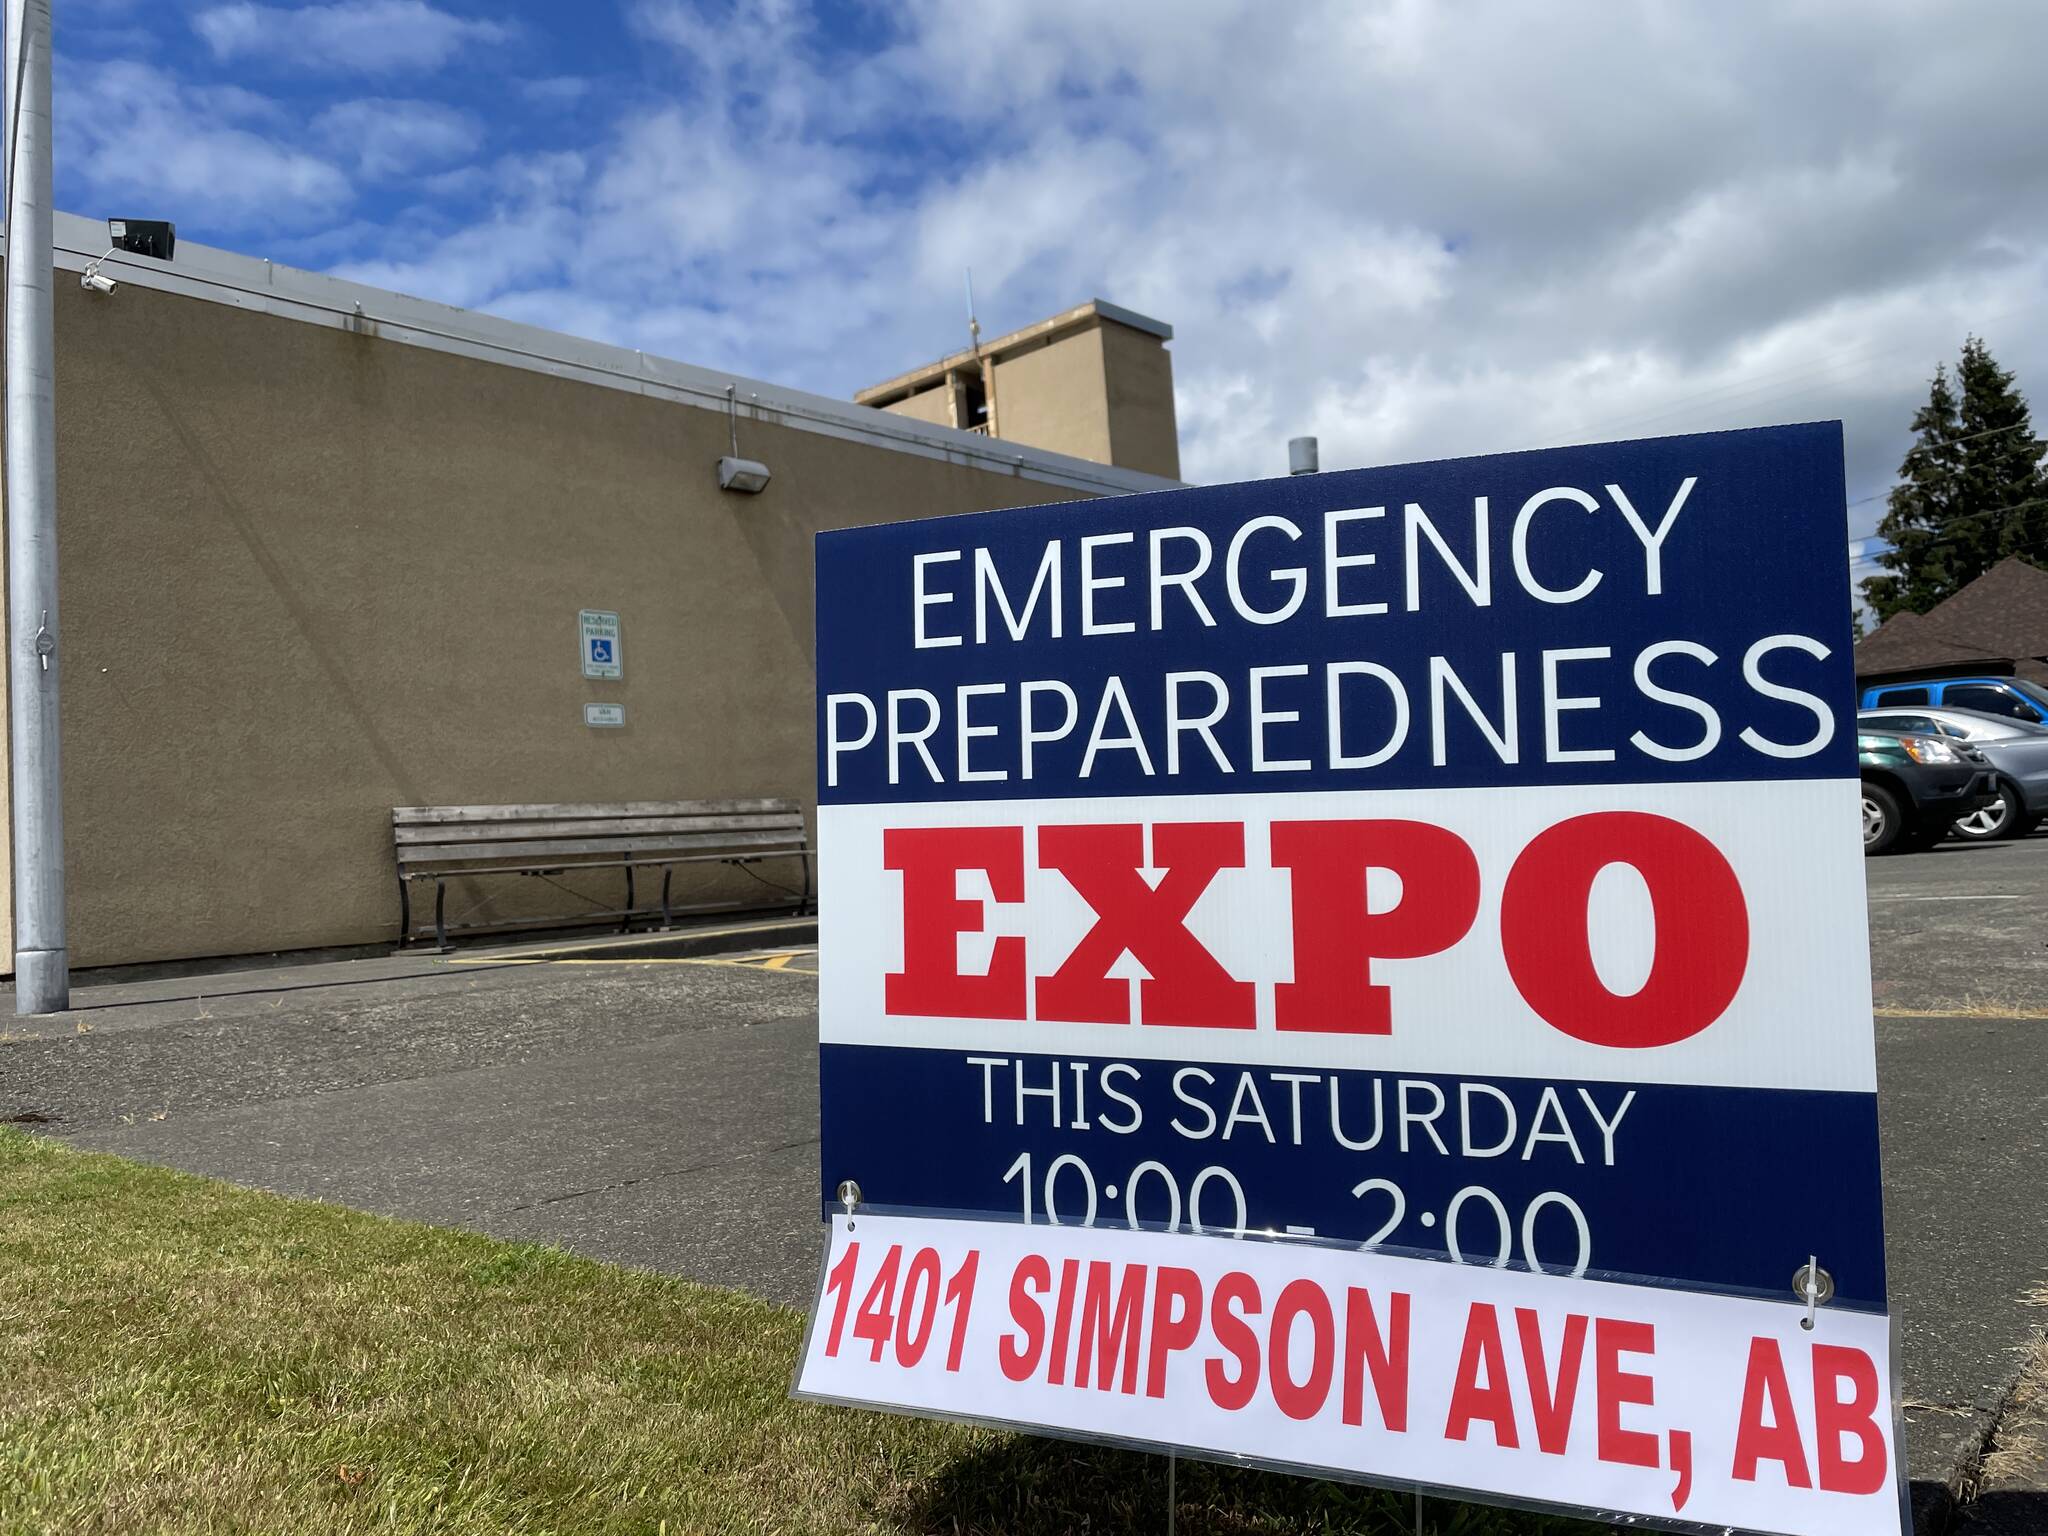 Michael S. Lockett / The Daily World
The county’s 7th annual Emergency Preparedness Expo will begin at 10 a.m. at the Moore Wright Group in Aberdeen.